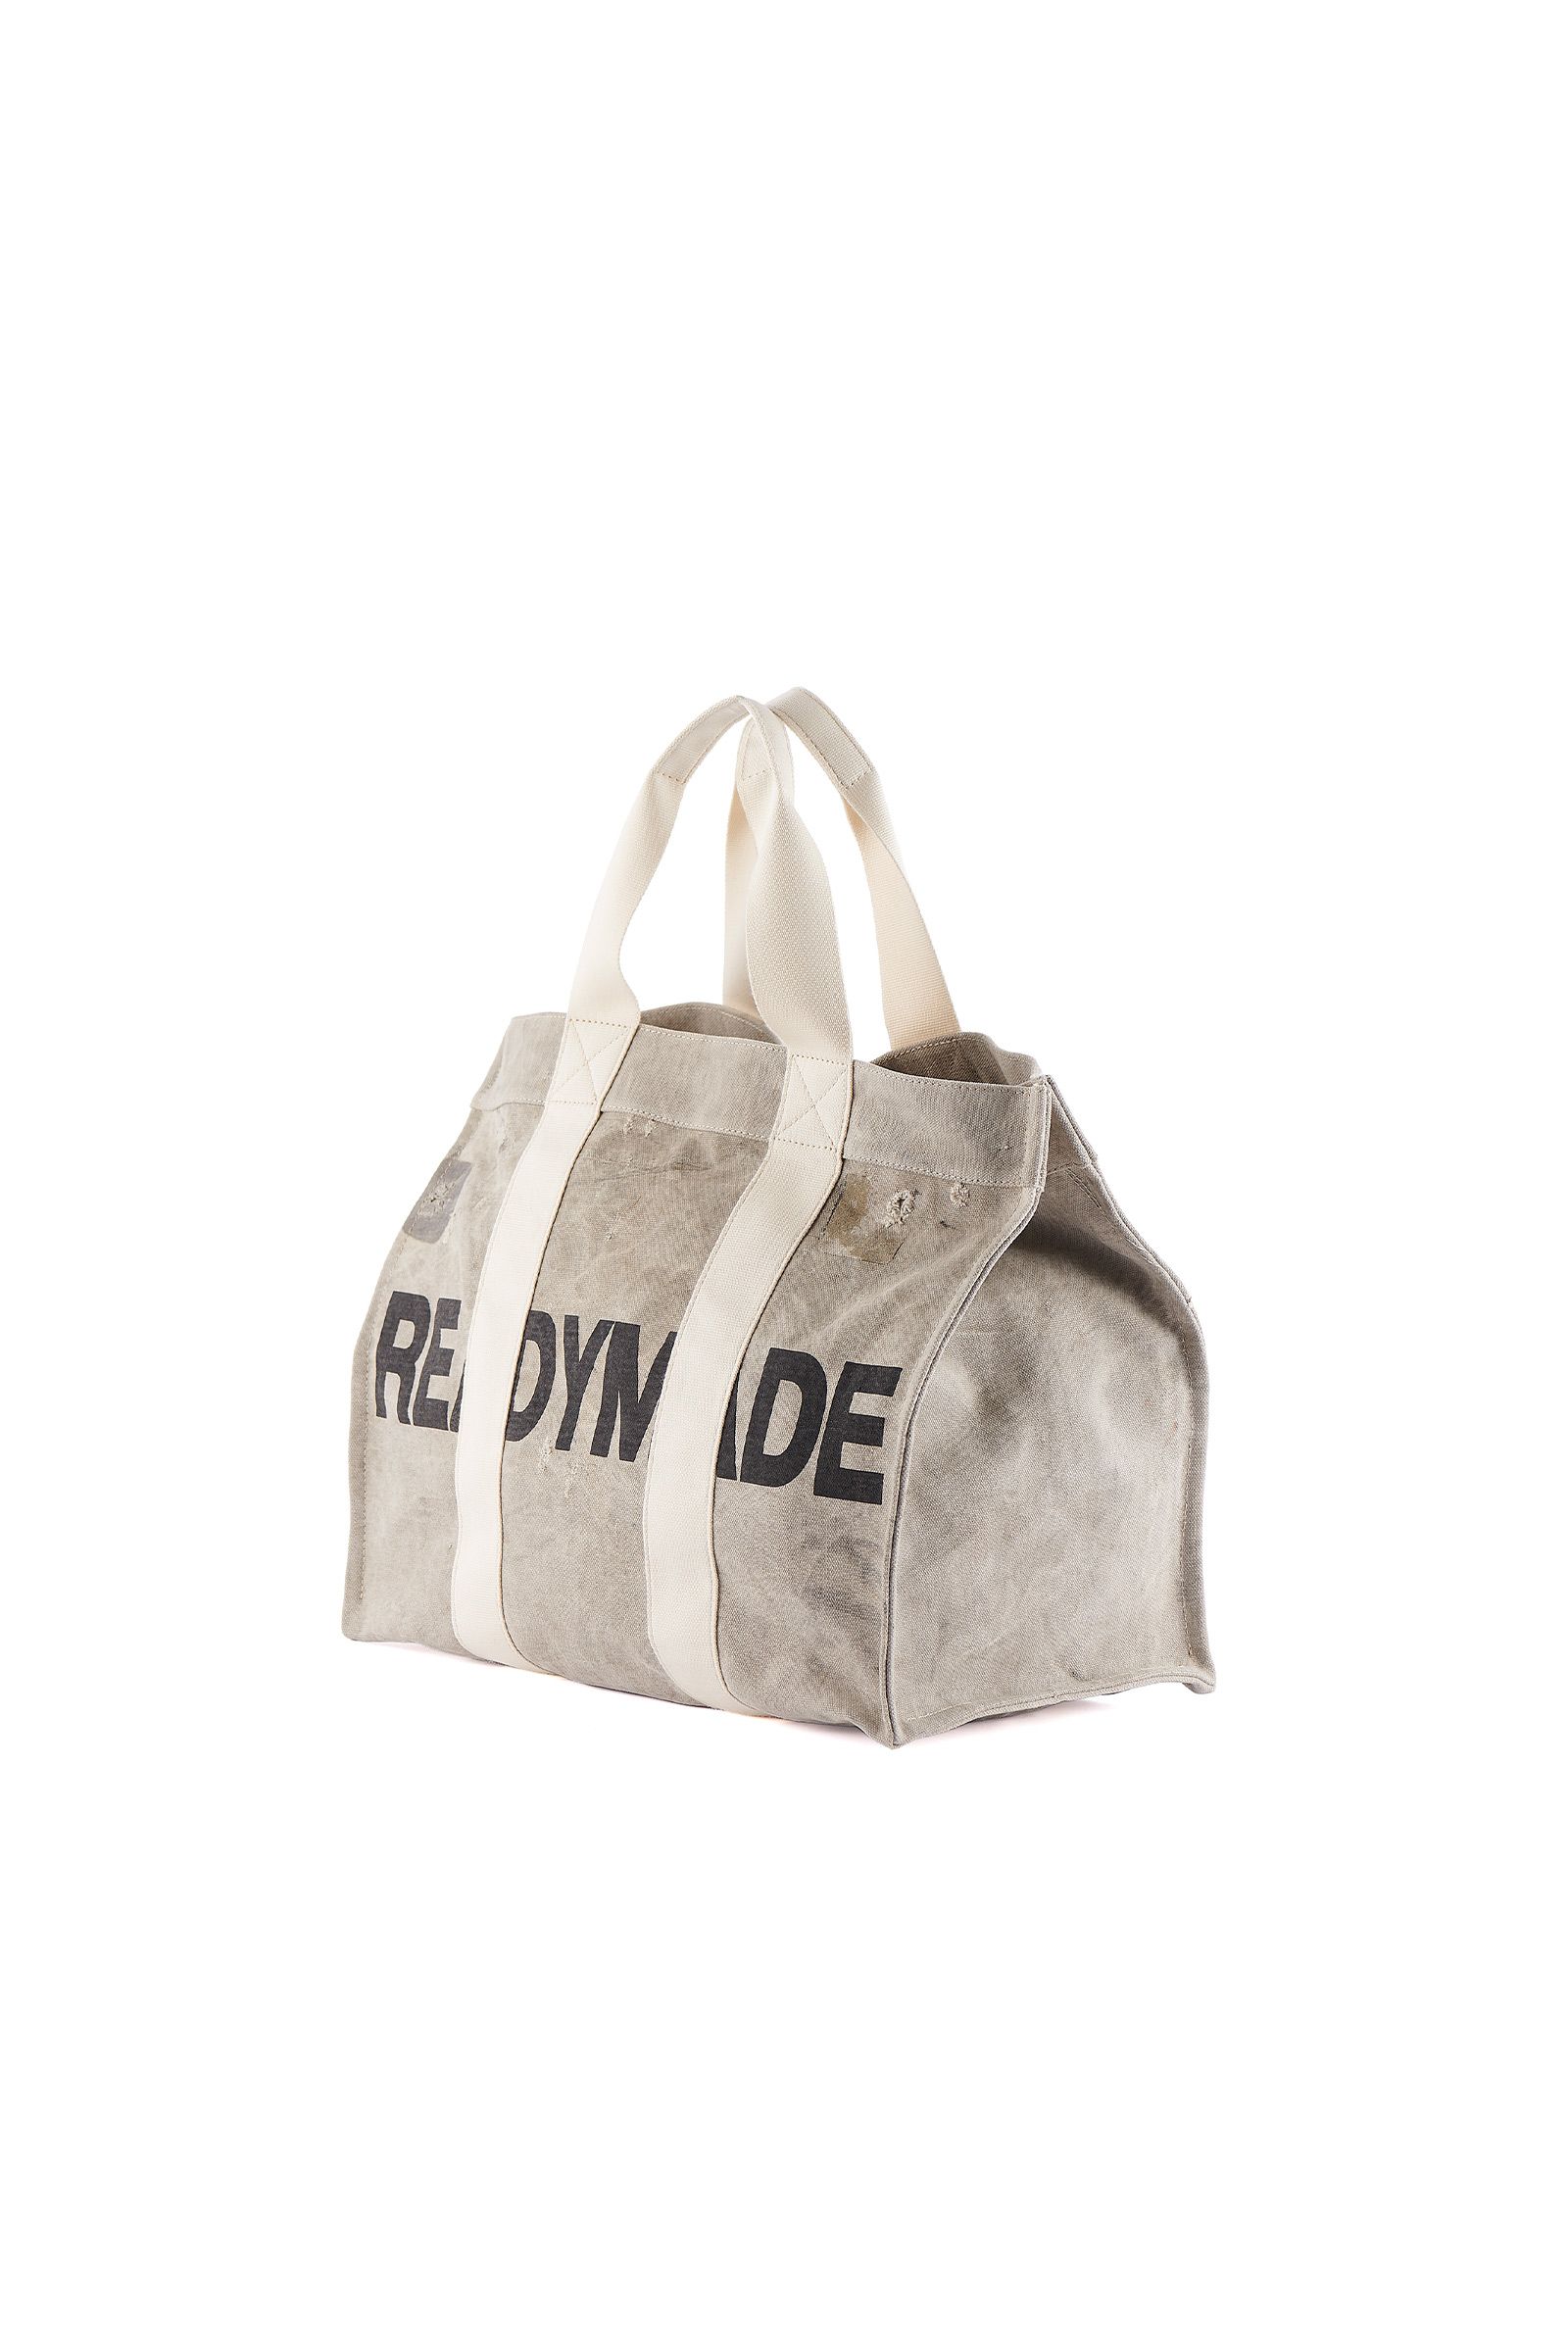 READYMADE EASY TOTE BAG レディメイド バッグ S 白 www